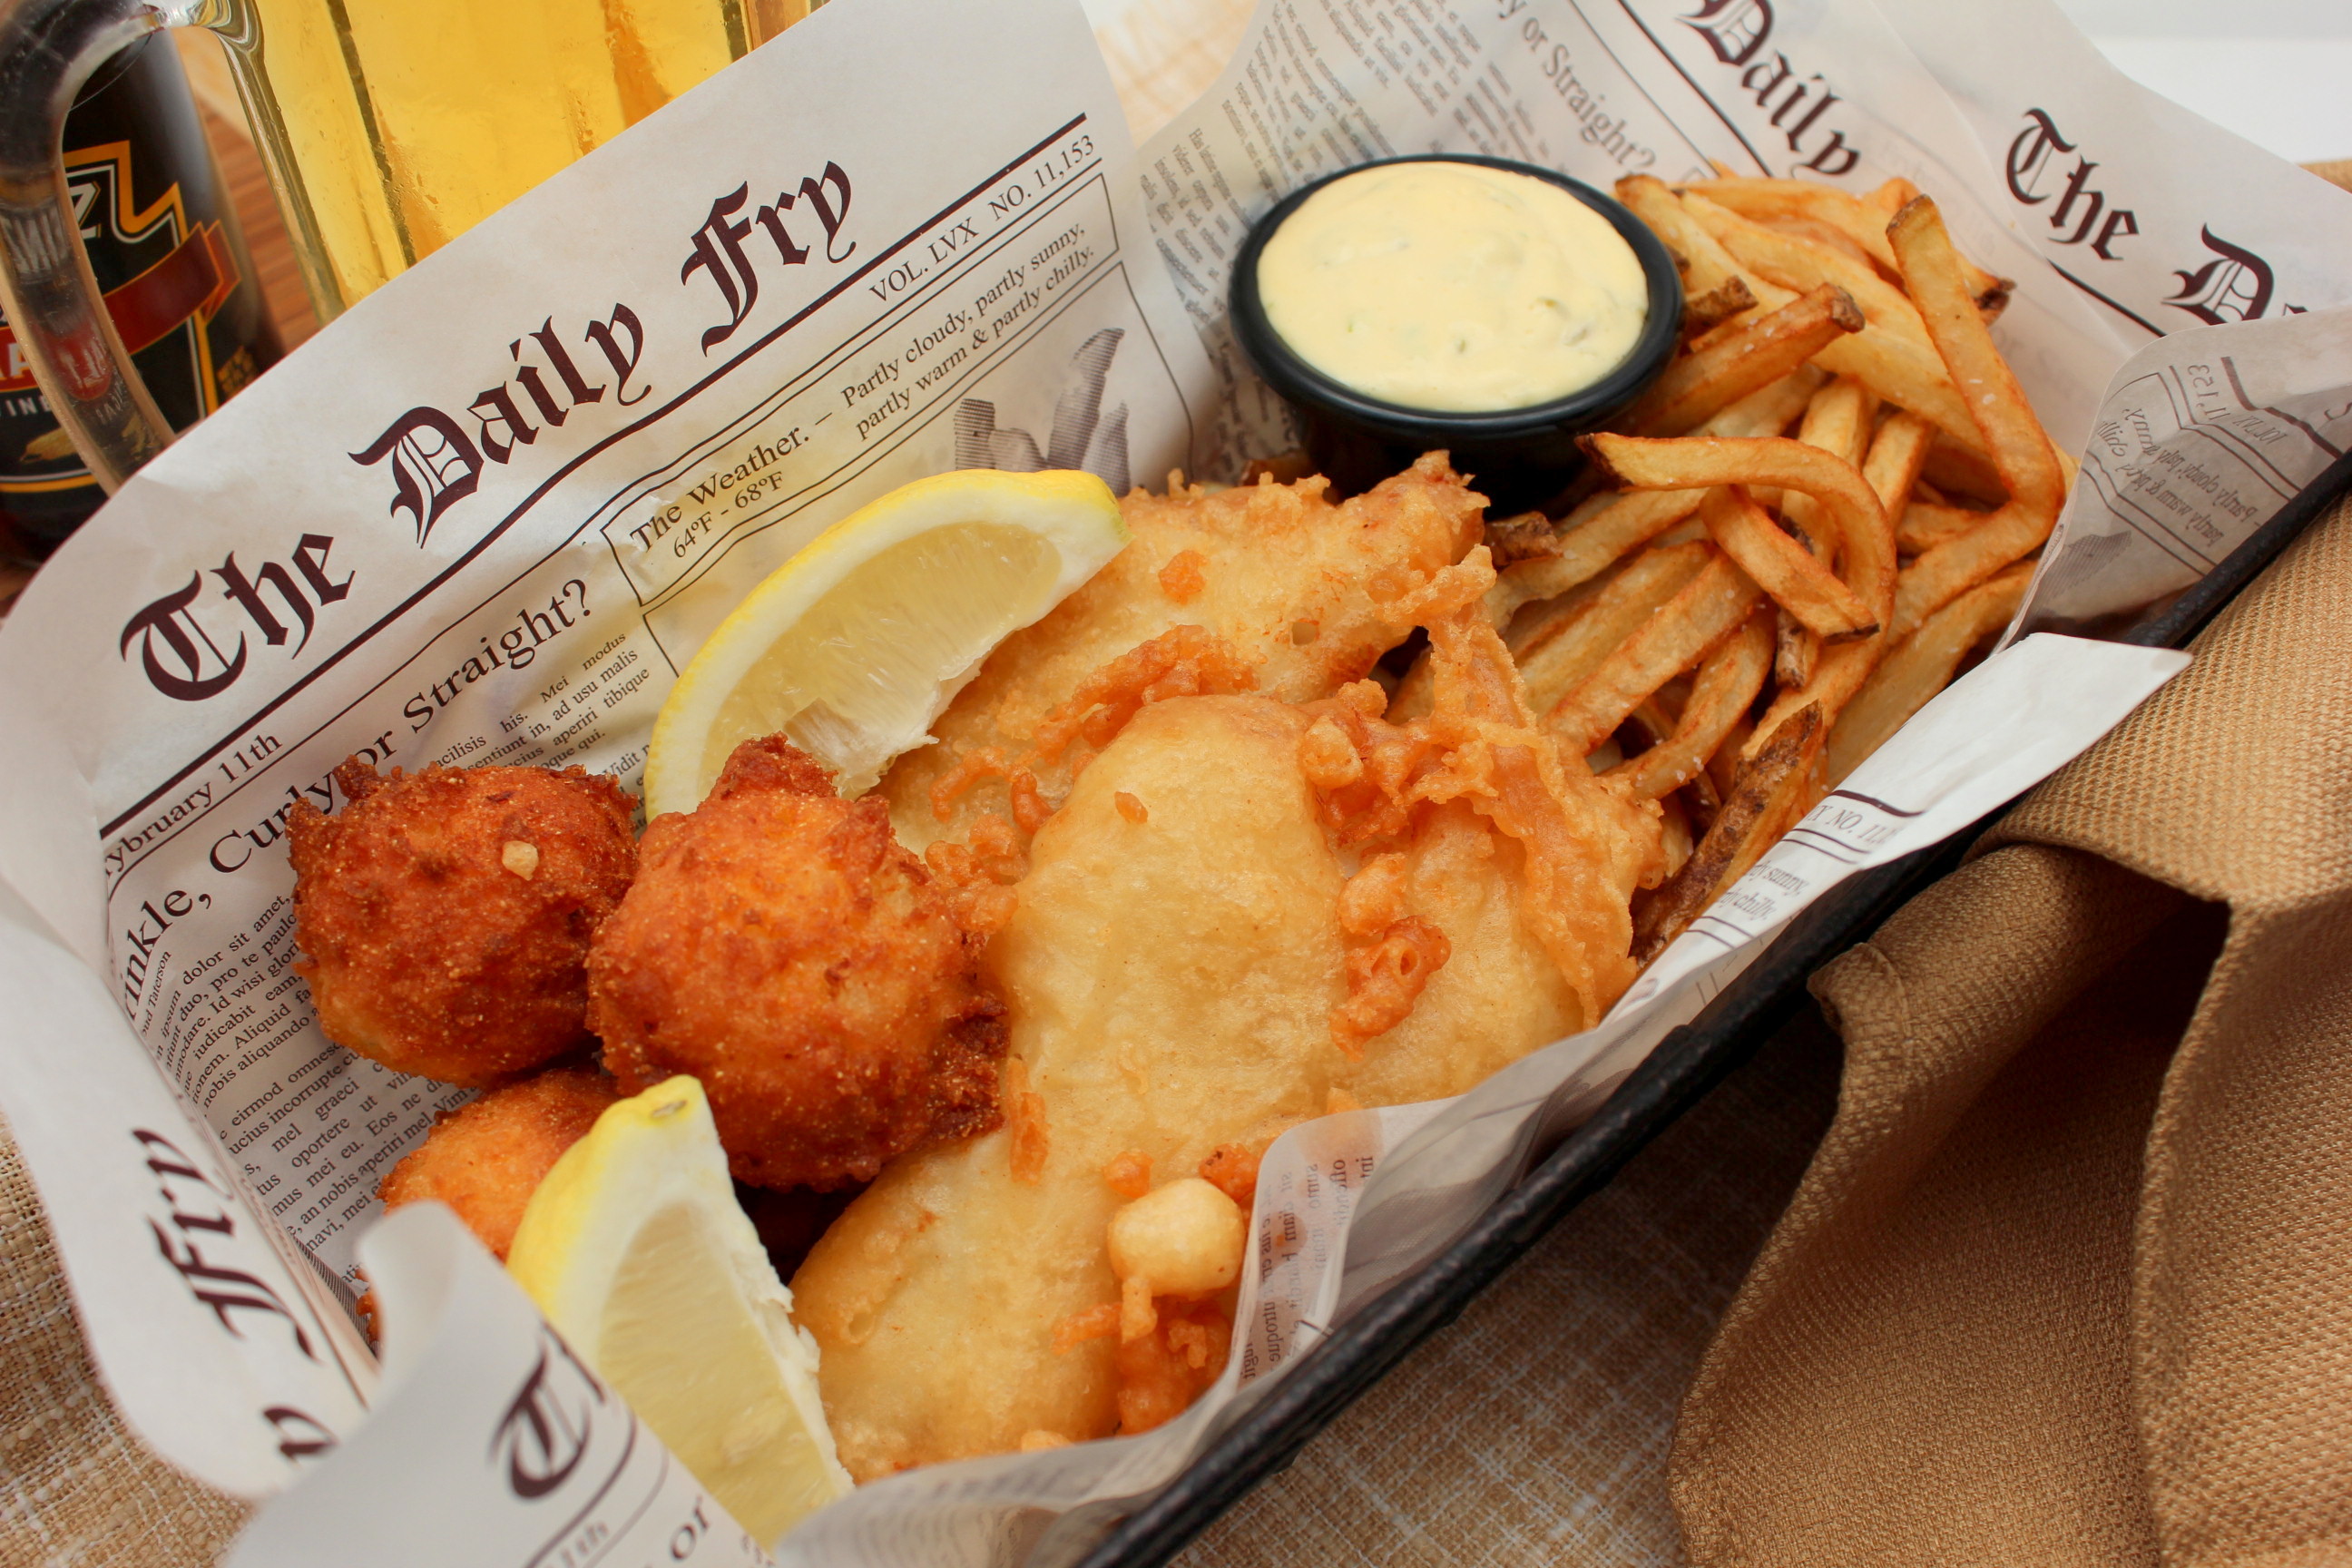 Can You Pass This Very British Food Quiz? fish and chips